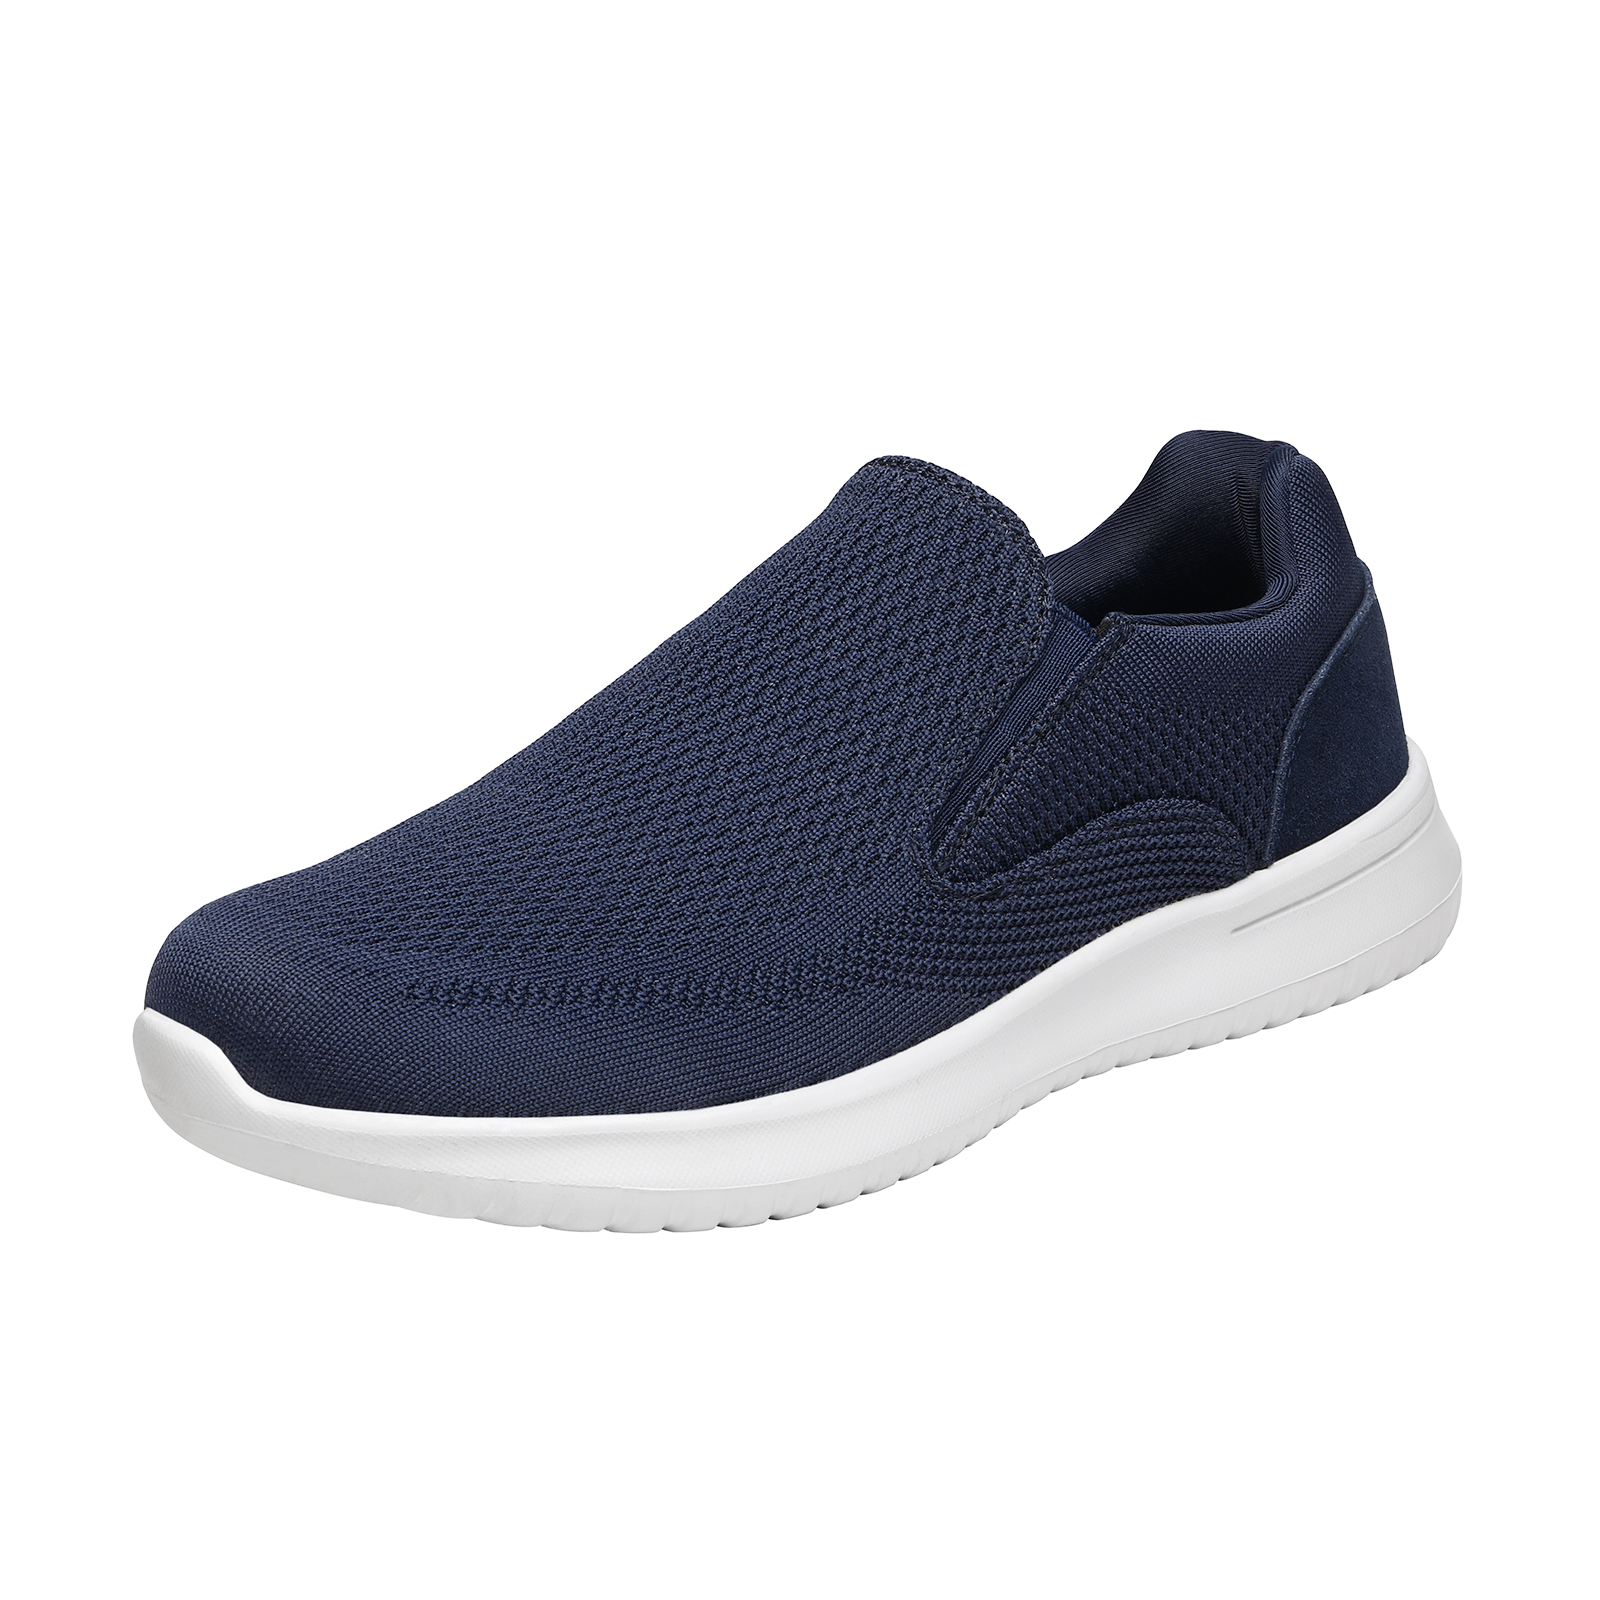 Bruno Marc Mens Slip On Loafers Casual Shoes Mesh Walking Shoes Fashion Sneakers Walk_Easy_01 Navy Size 8.5 - image 1 of 5